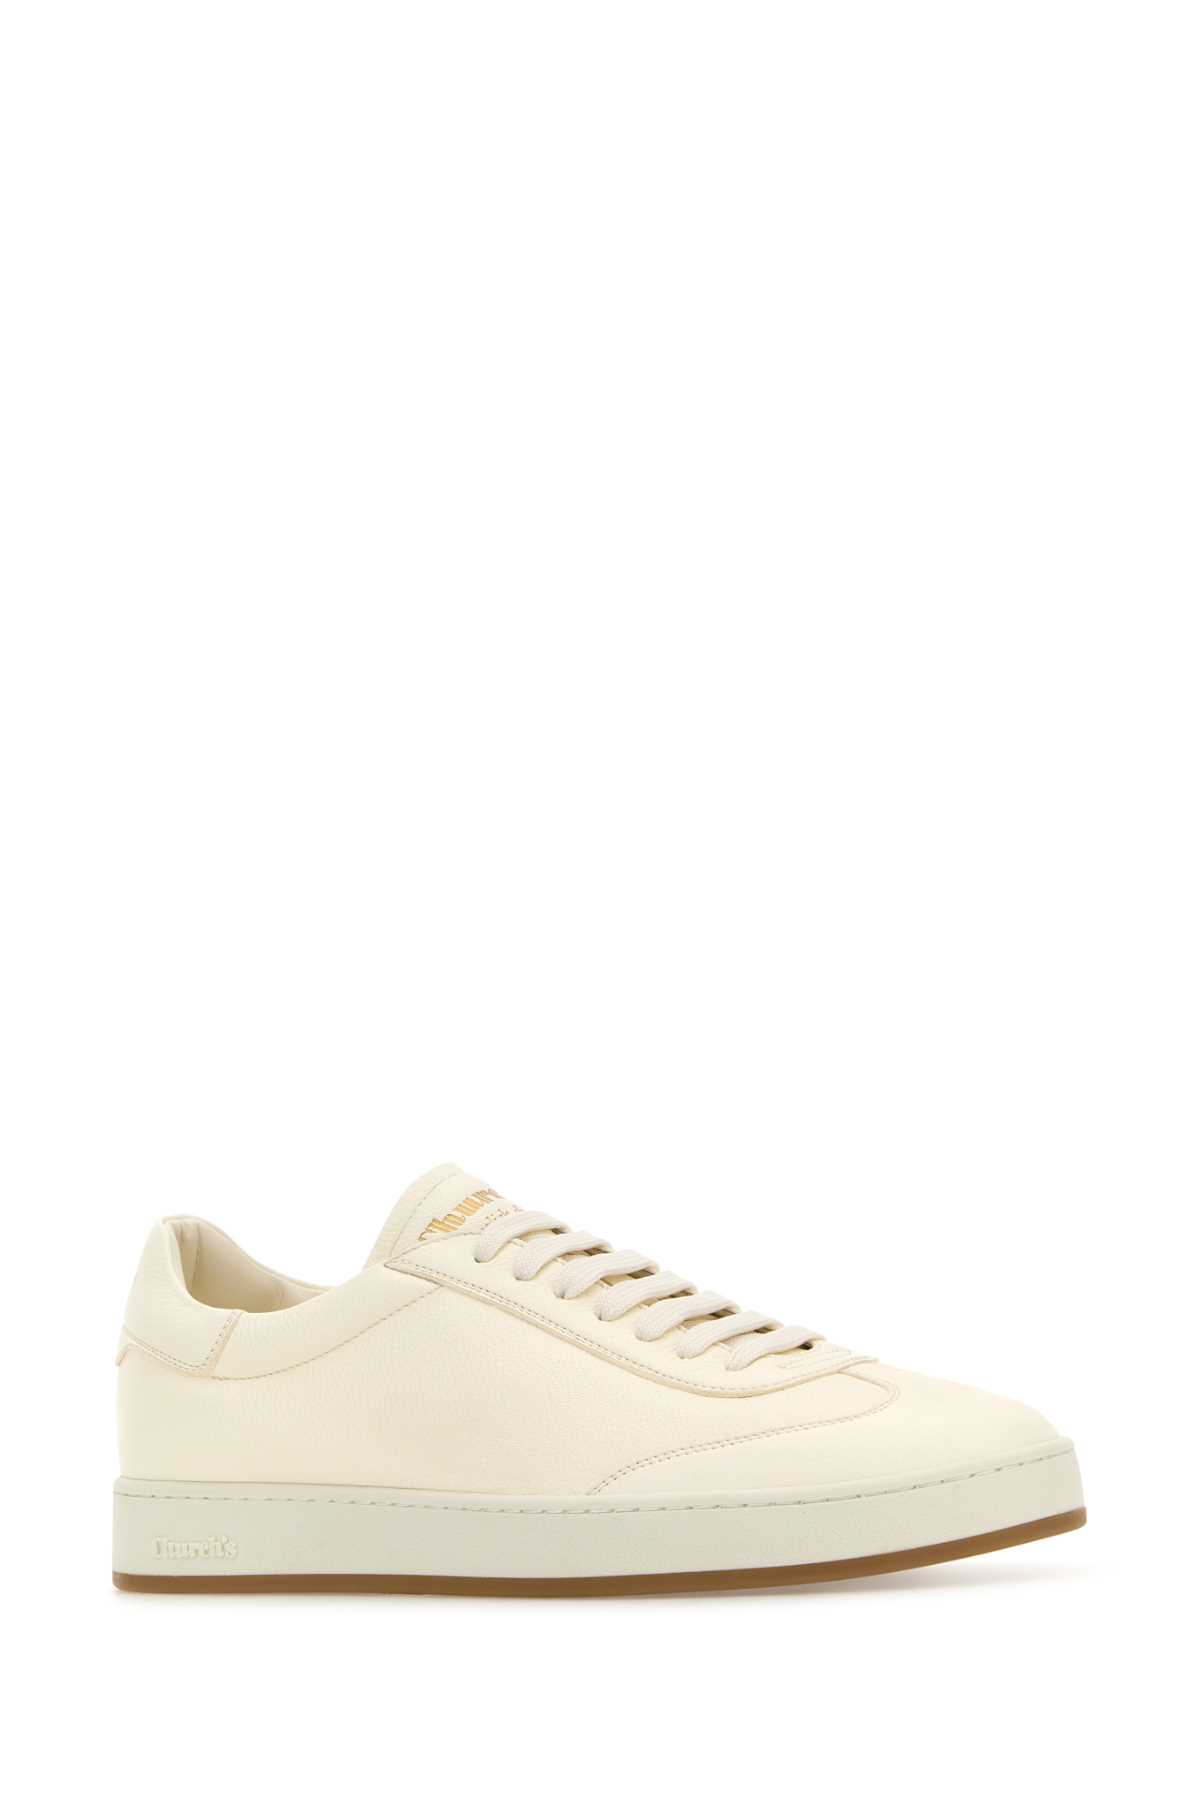 Shop Church's Ivory Leather Largs Sneakers